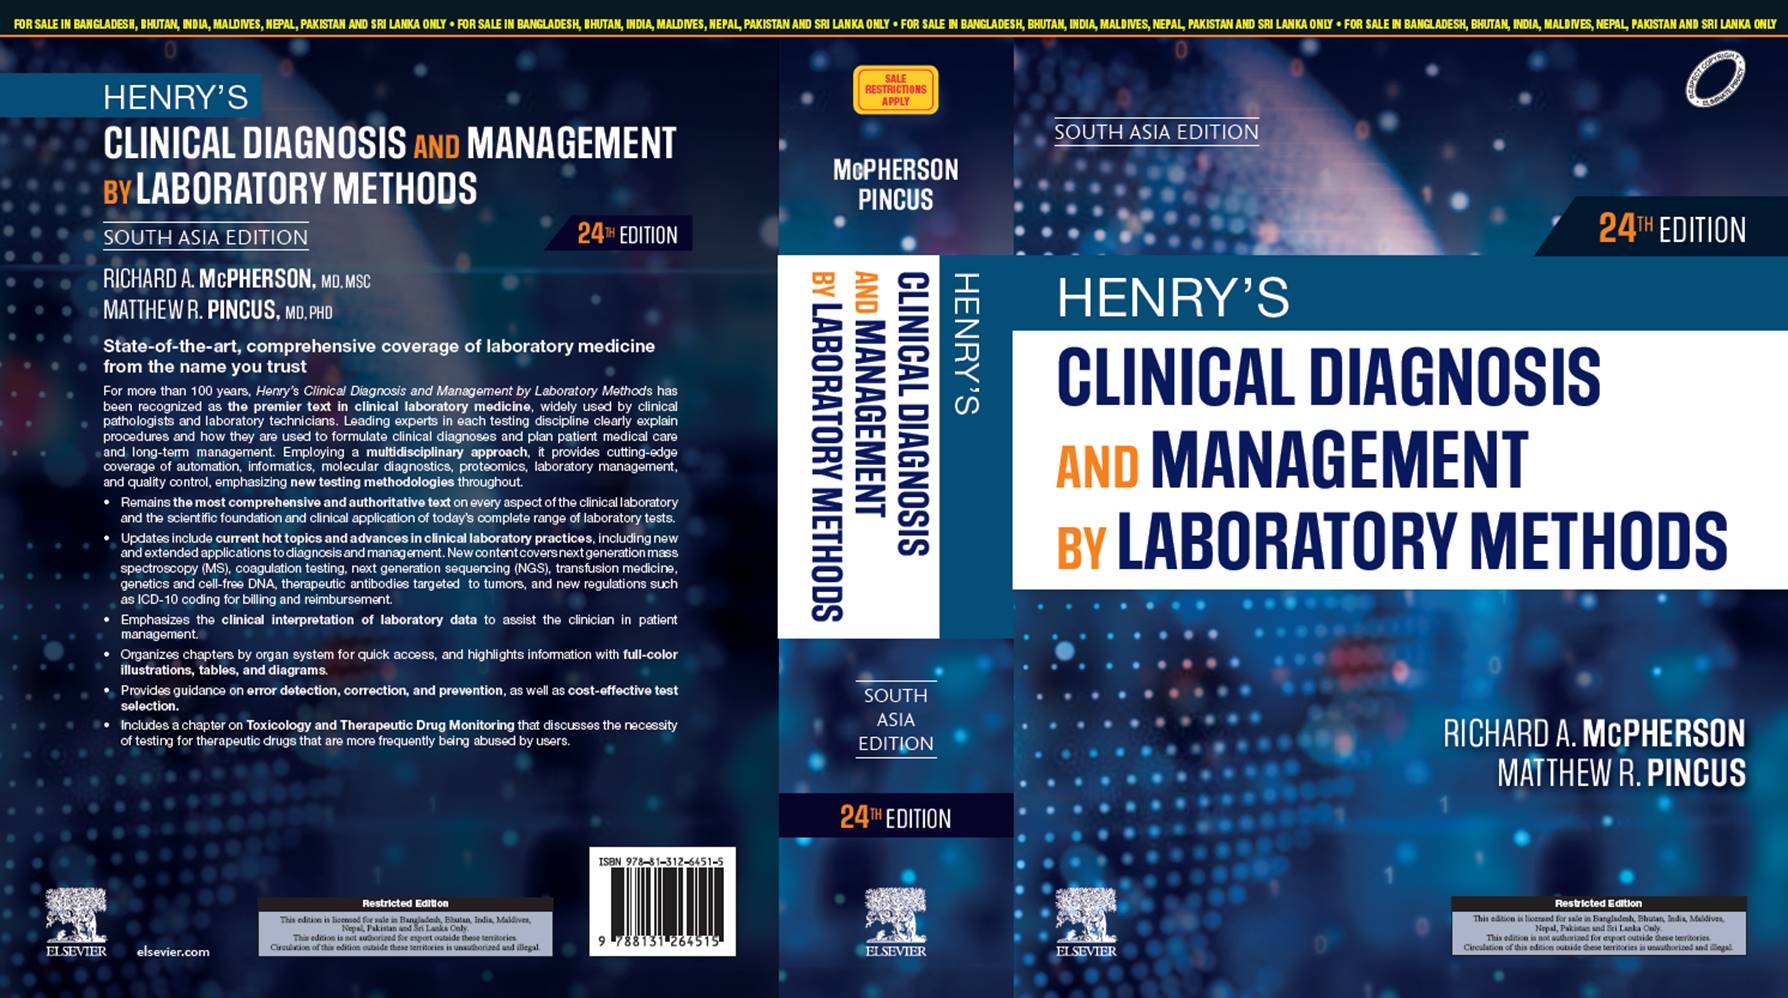 Henry's Clinical Diagnosis and Management by Laboratory Methods, 24e, South Asia Edition